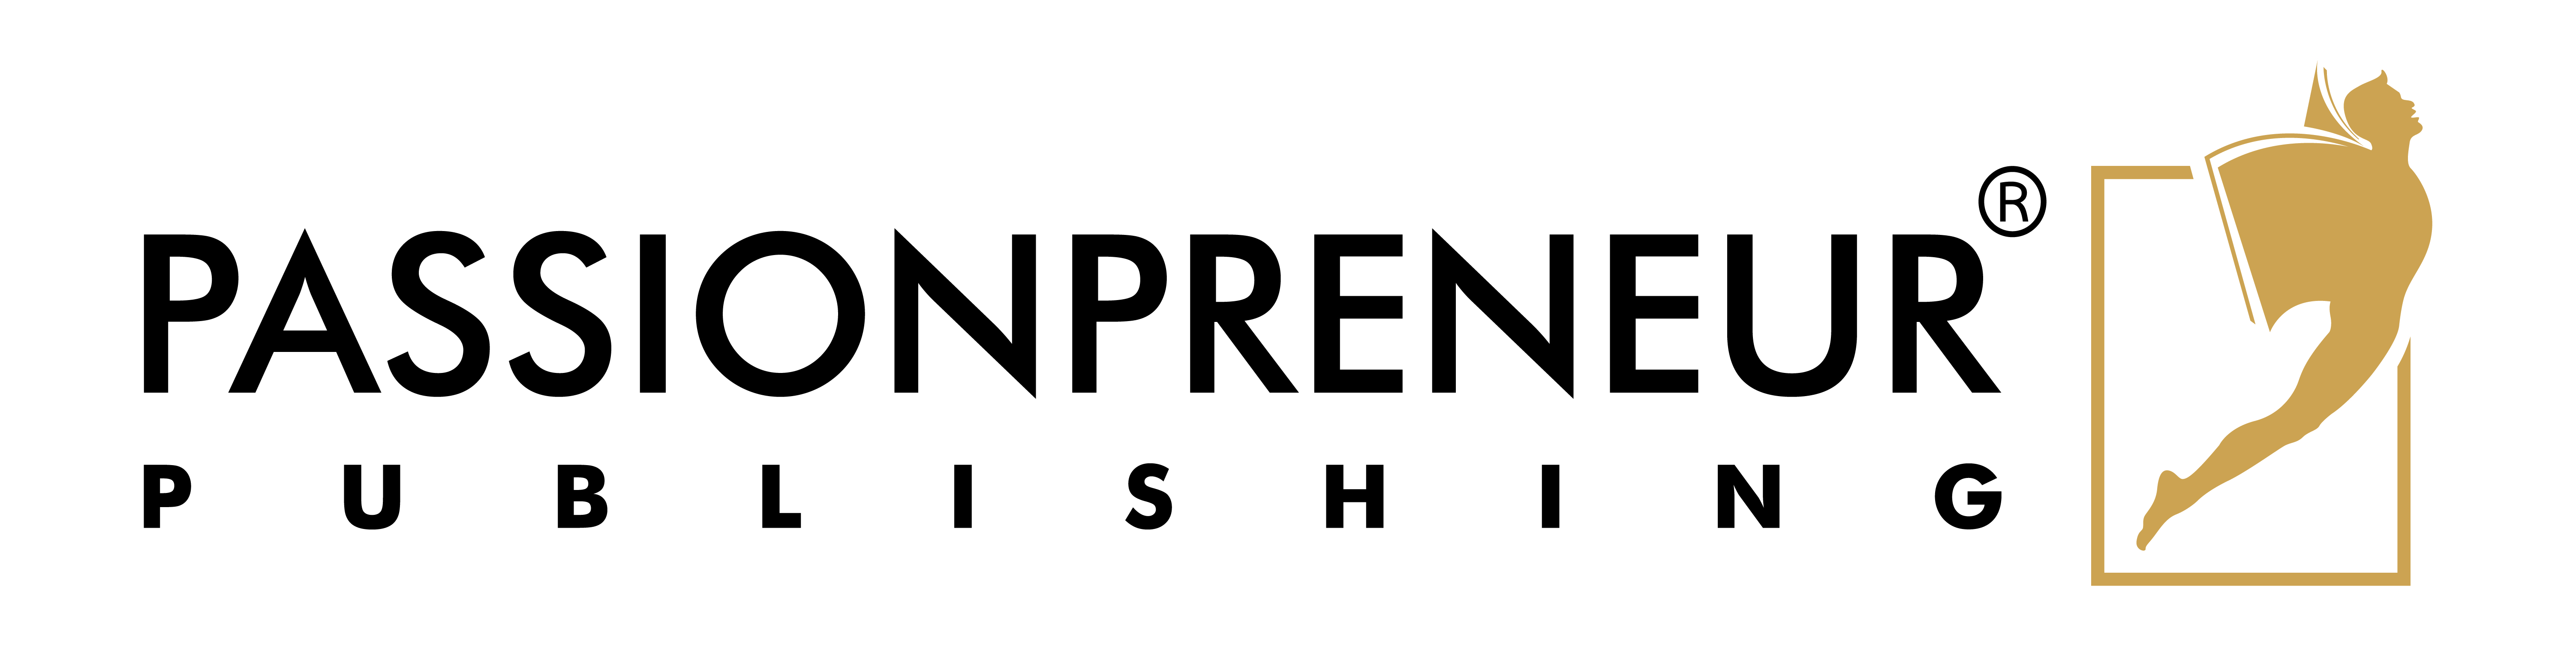 Passionpreneur Publishing  You have a message to share the world is waiting for your book